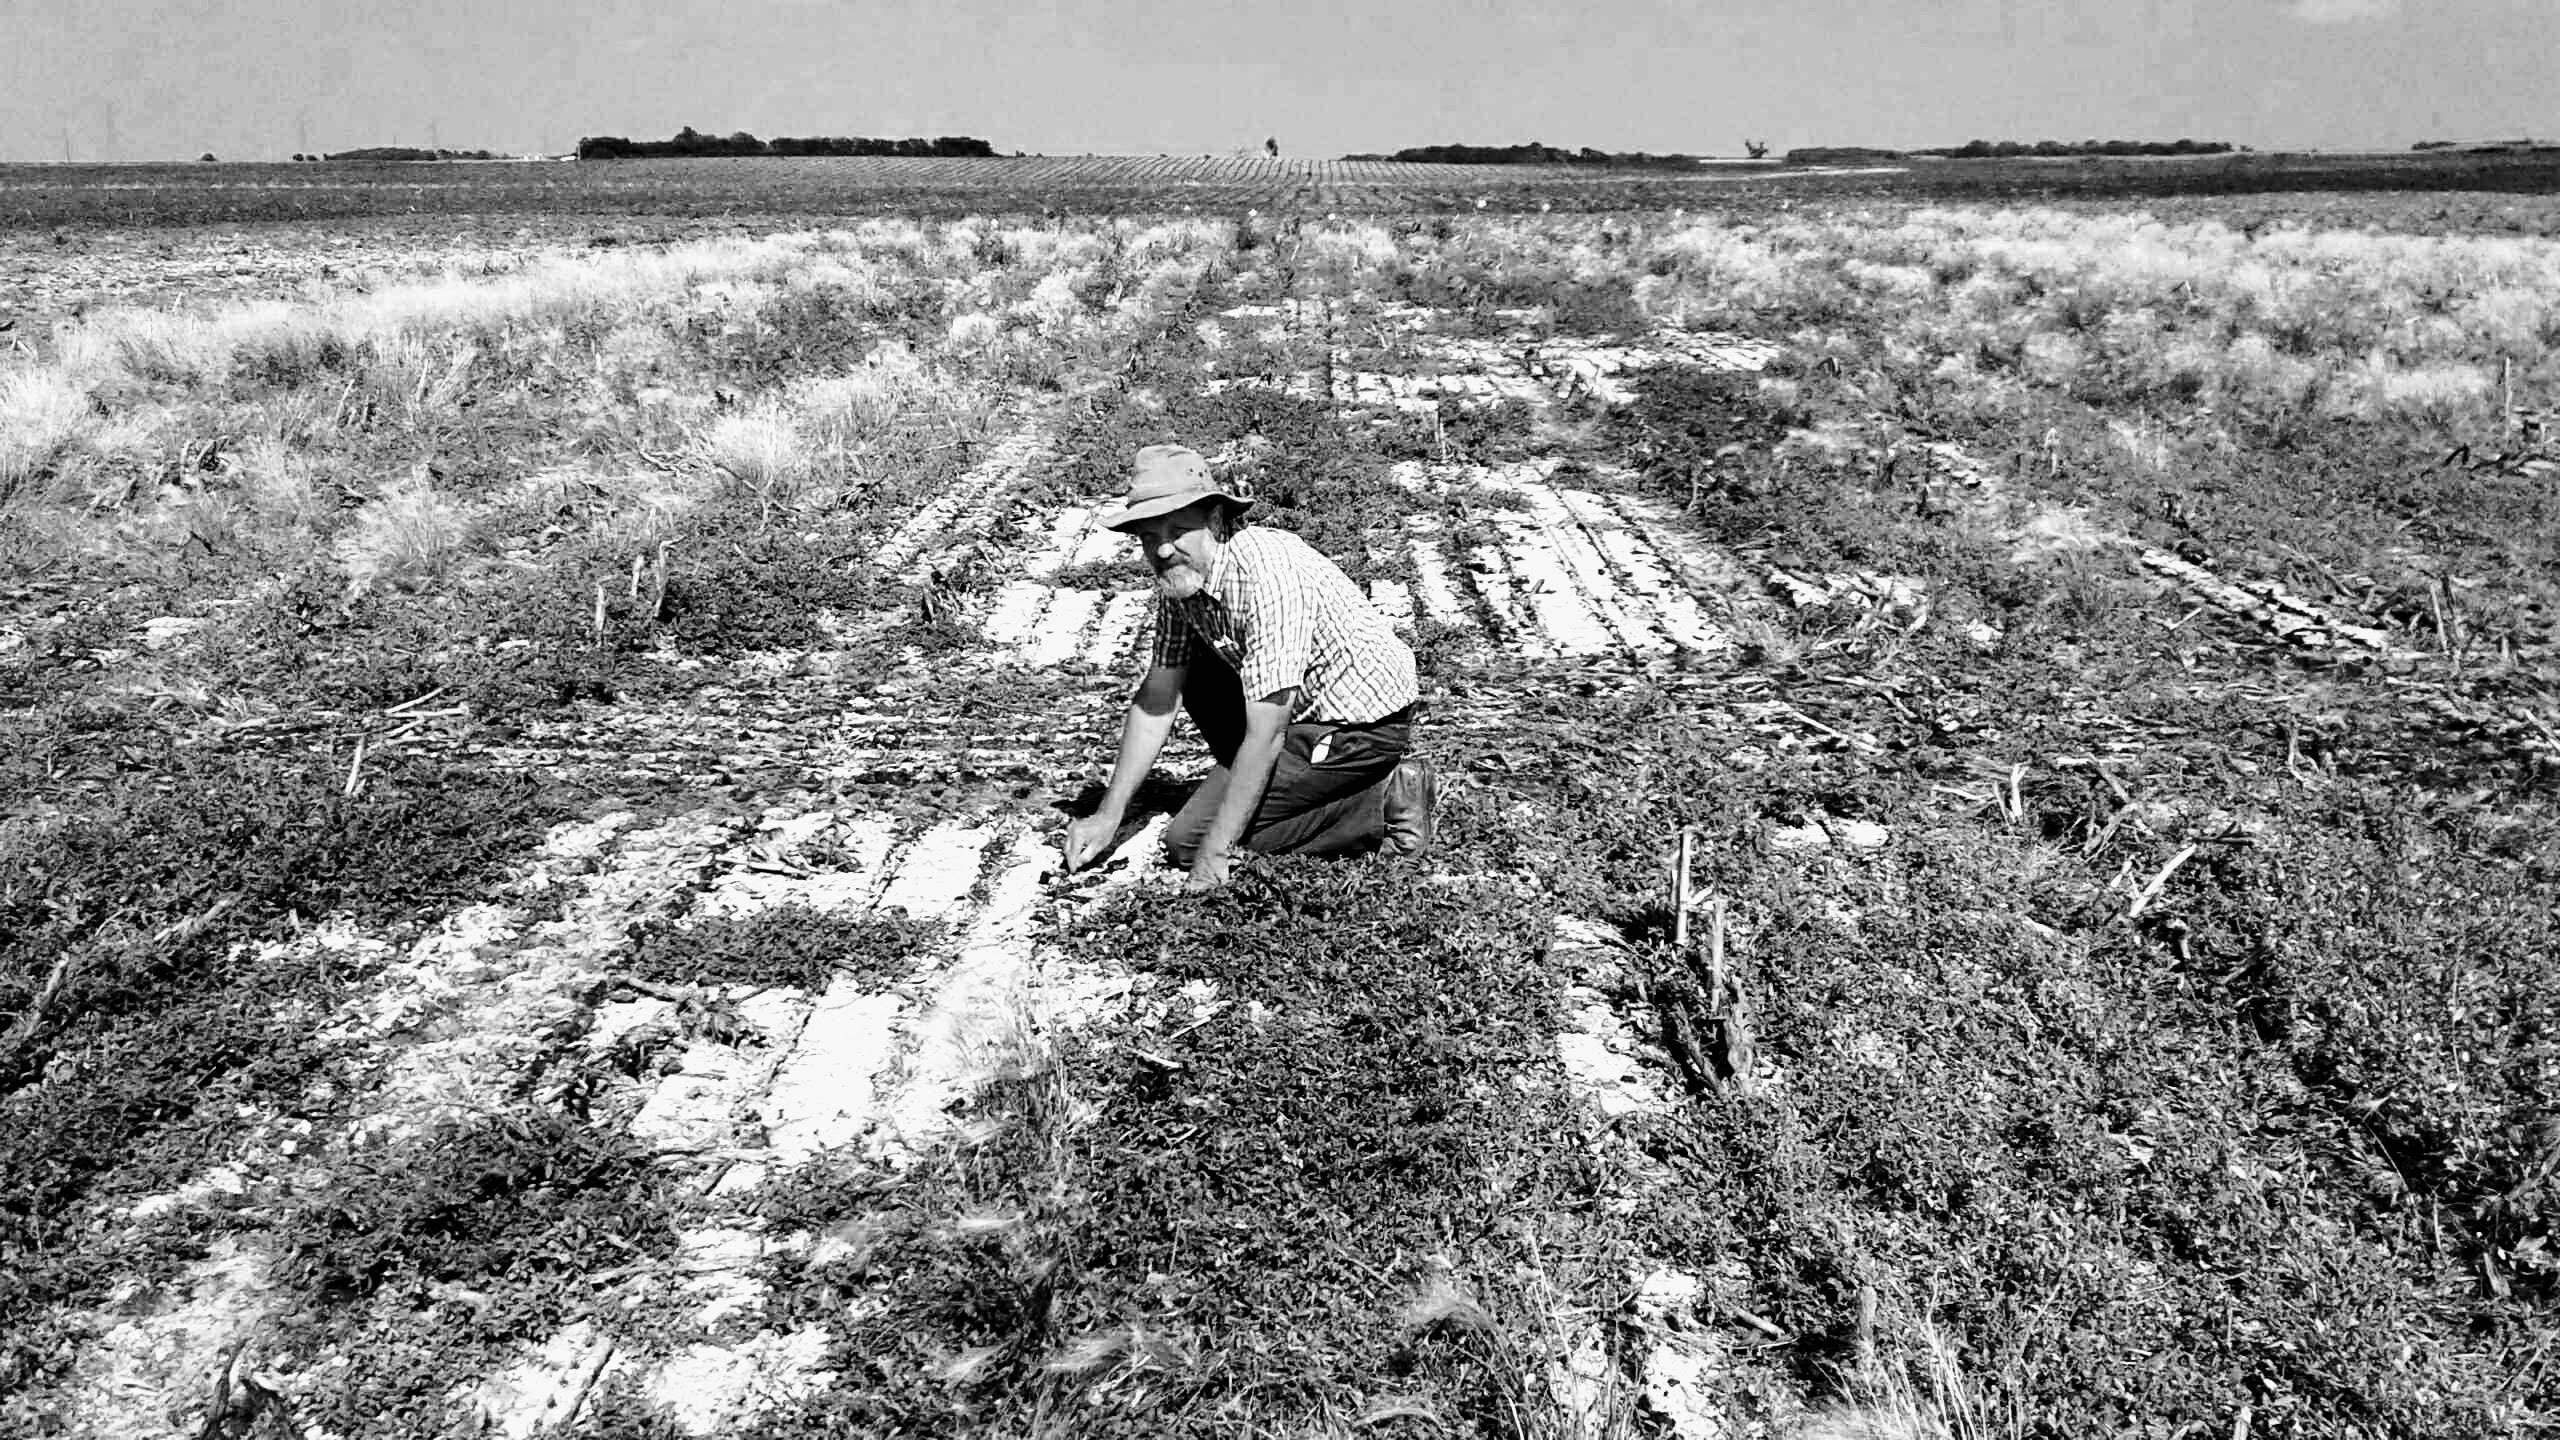 A man inspecting a field with salty soil.